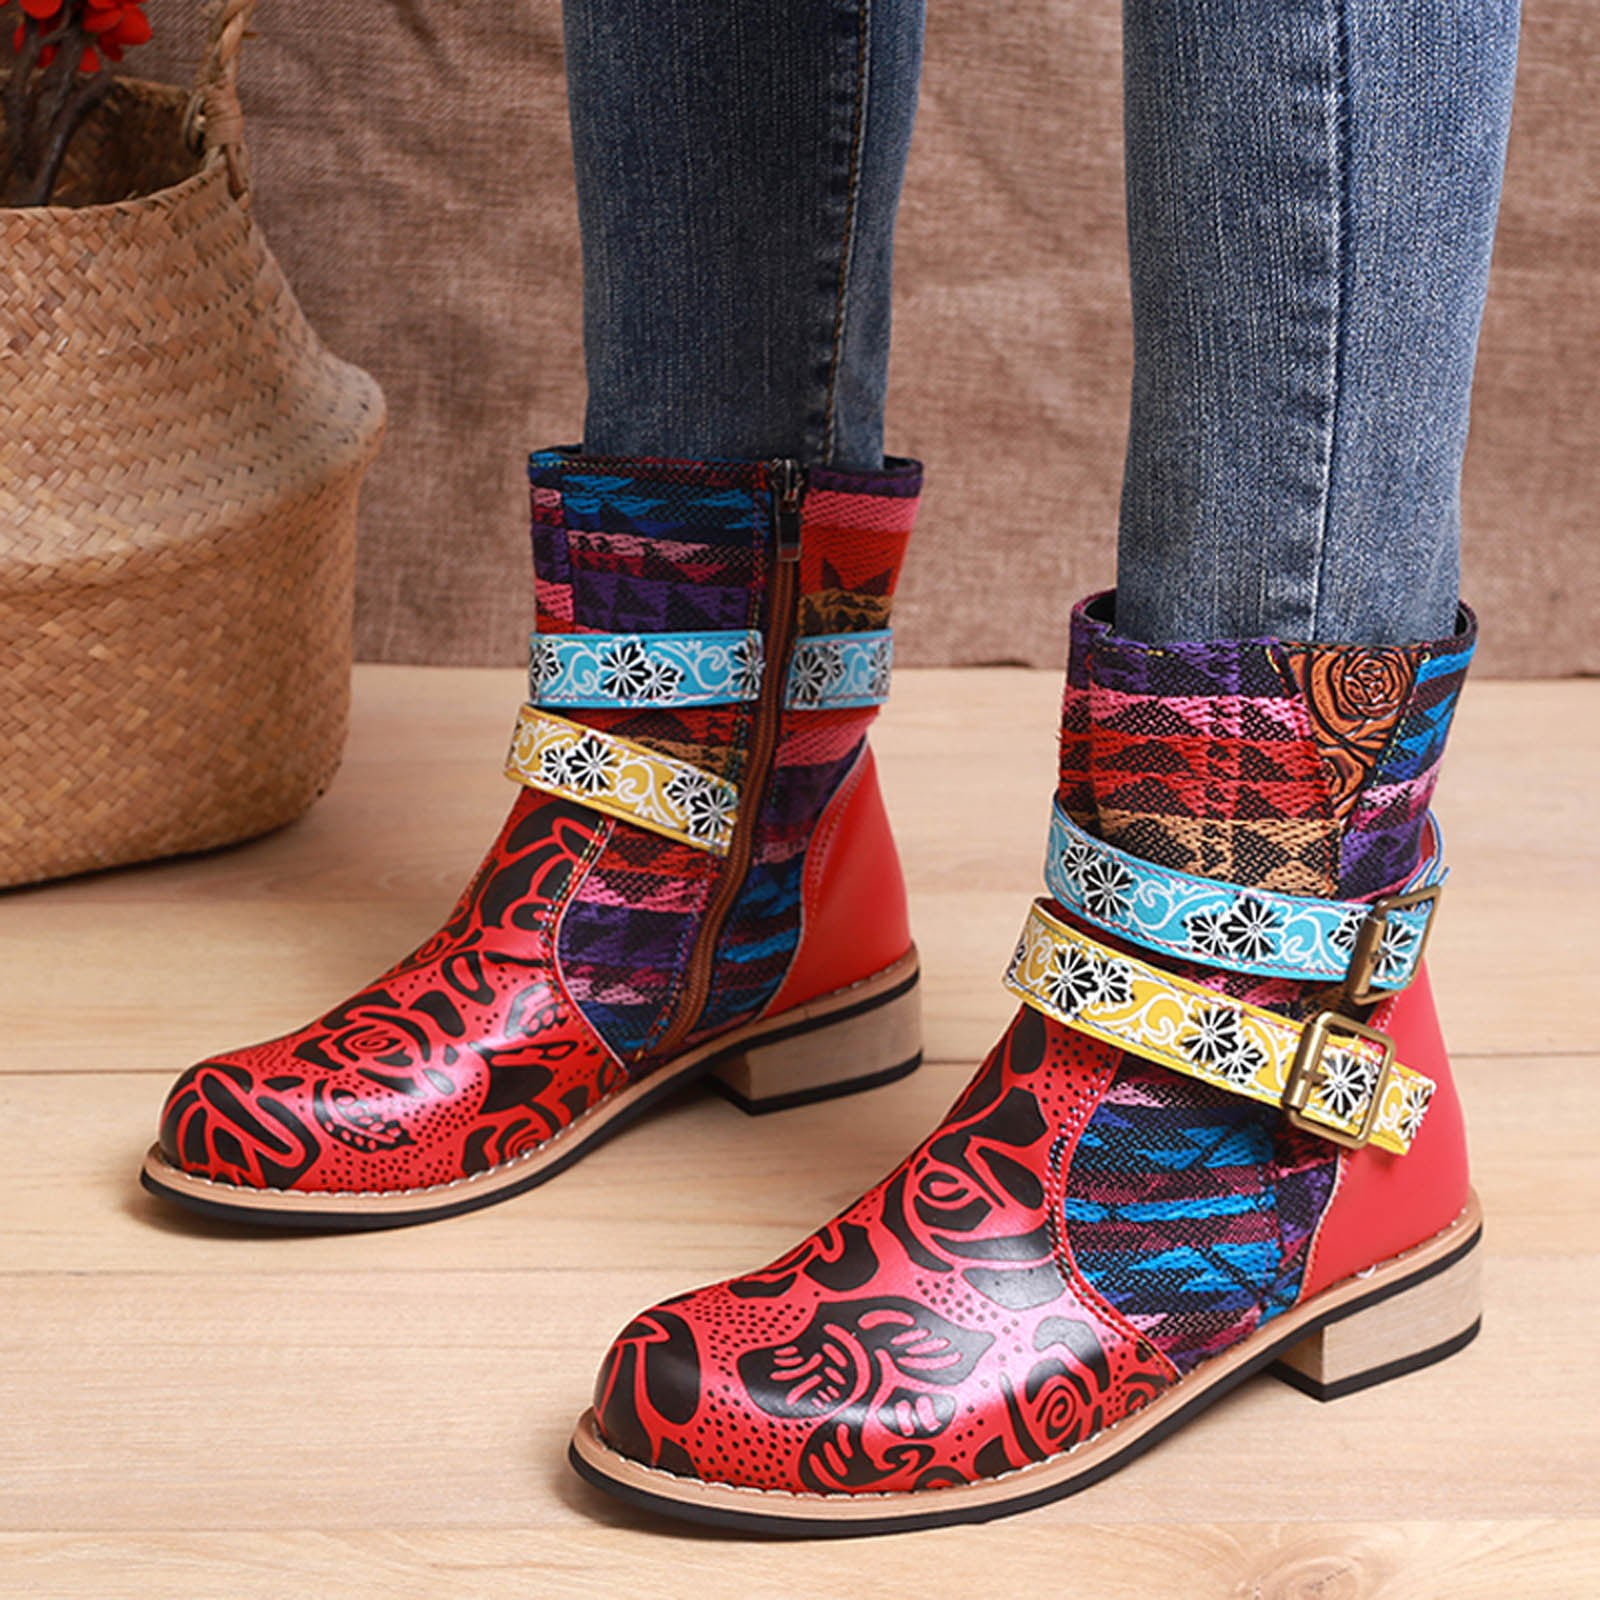 Vintage Womens Leather Ankle Boot Ladies Flowers Wedge Heel Leisure Ethnic Shoes